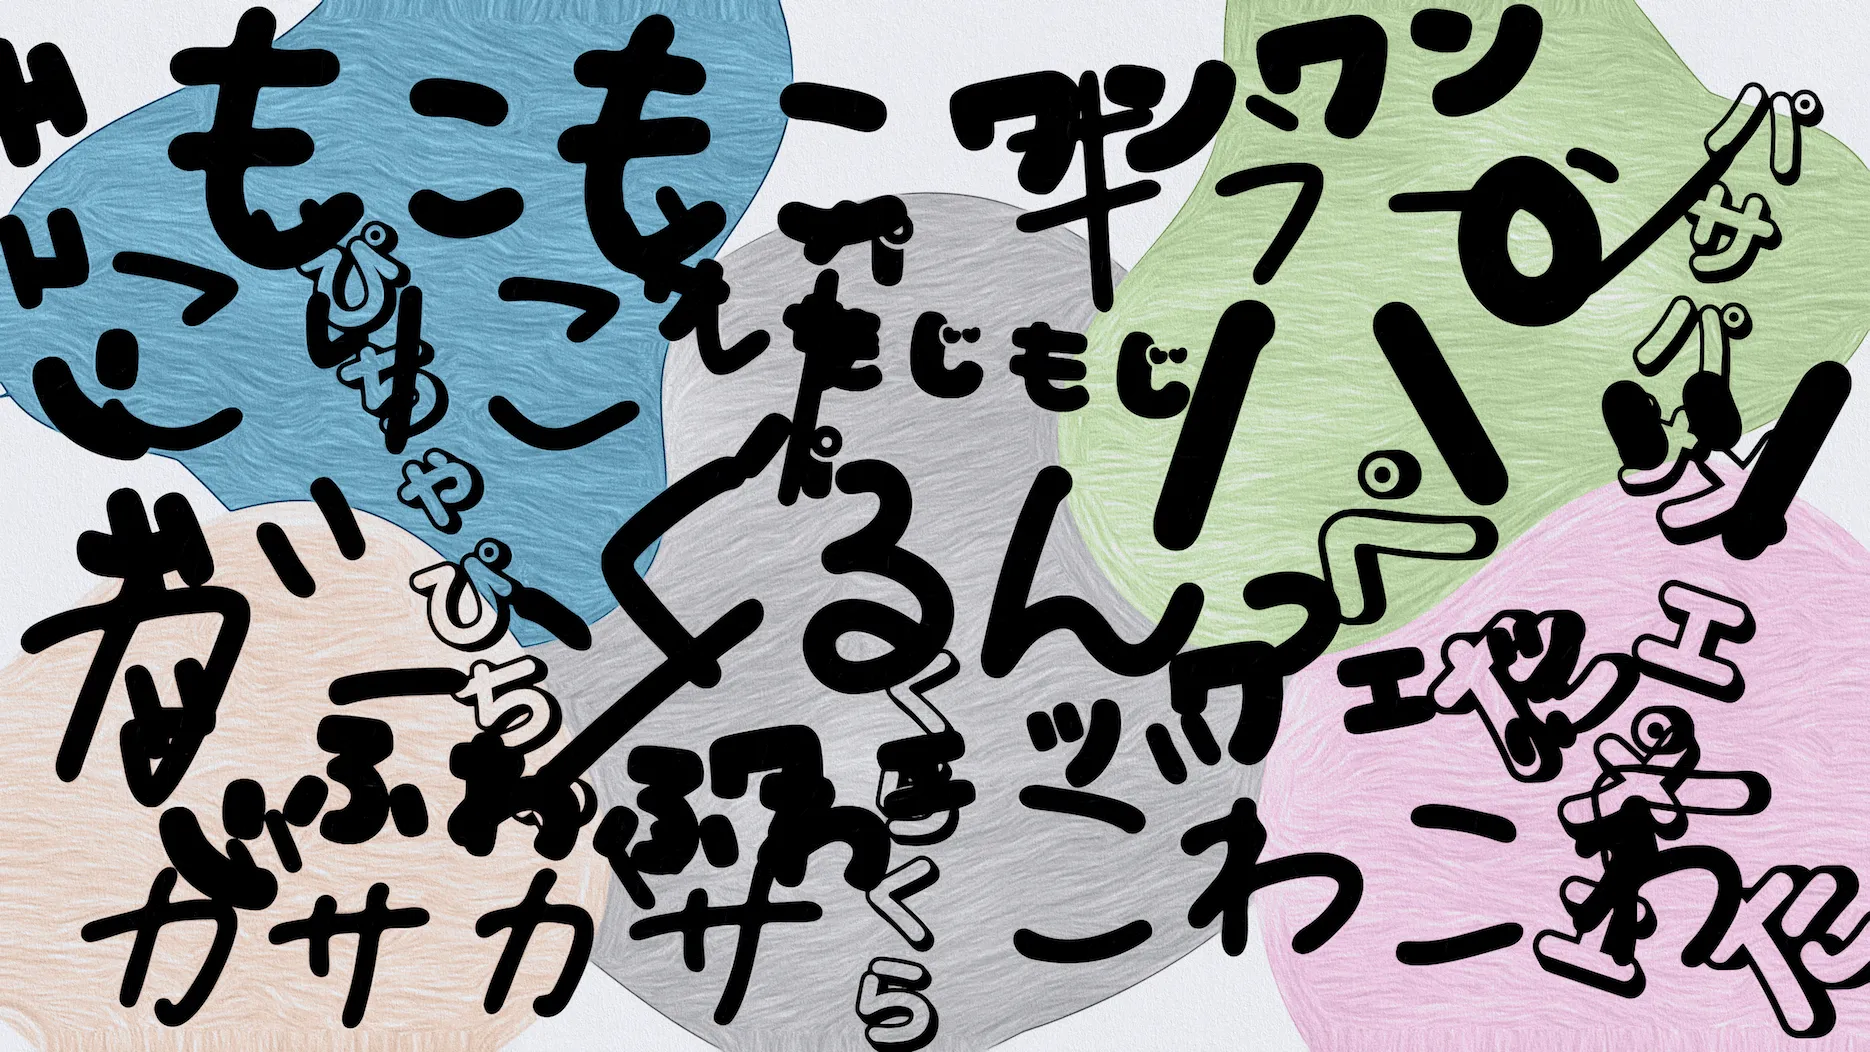 Japanese sound-symbolic words in global contexts